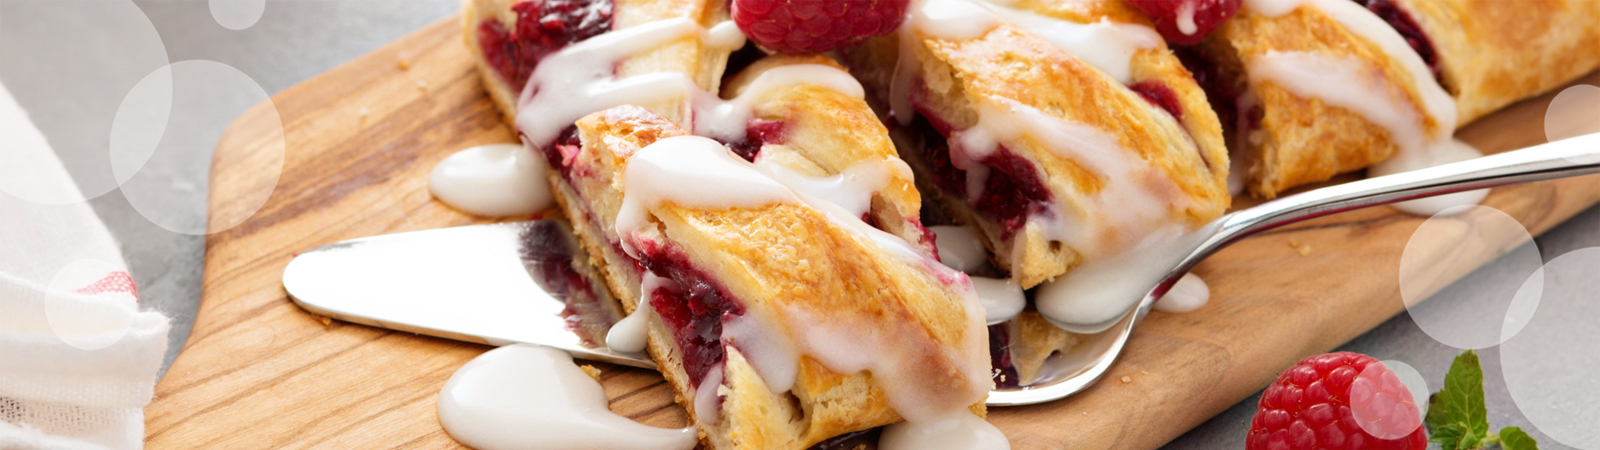 danish pastry with icing